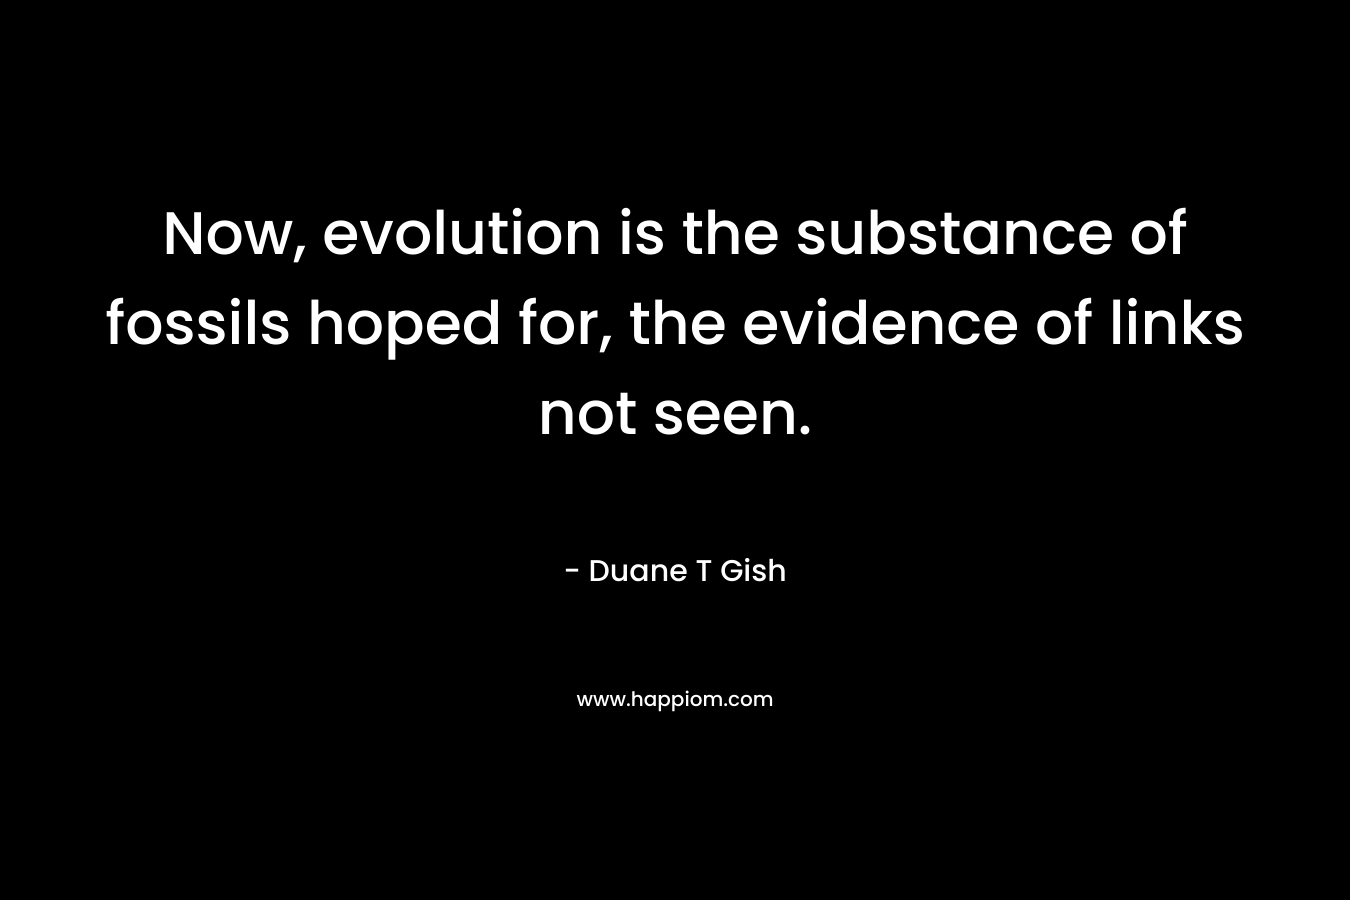 Now, evolution is the substance of fossils hoped for, the evidence of links not seen. – Duane T Gish